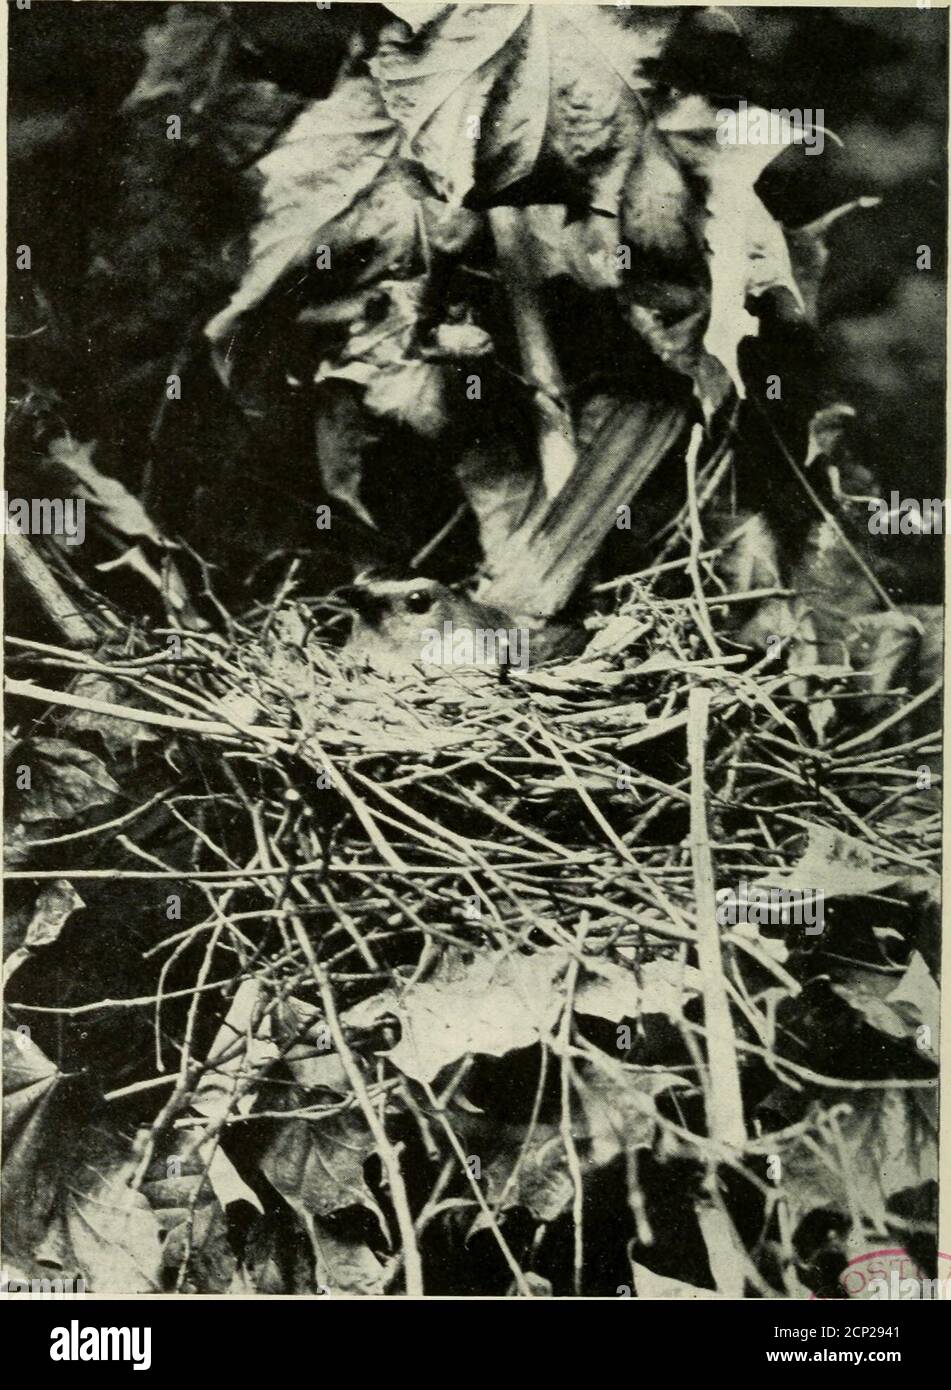 . Camera studies of wild birds in their homes . Fig. 110. NEST OF CATBIRD. 130. Fig. 111. CATBIRD OX HER NEST. -,^f3p^^ 131 BIRD MIMICS Catbird You cannot judge the disposition of a person by hisclothes^ neither can you judge that of a bird by its feath-ers. A soft gray suit and black cap is the garb worn bythe Catbird^—raiment that might indicate its wearer to bea quiet^ Quaker-like bird although in reality no other has amore irrascible temper than our Catbird. A perfect modelof propriety when everything is in accord with his tempera-ment but a real virago and scold when the least thing goes Stock Photo